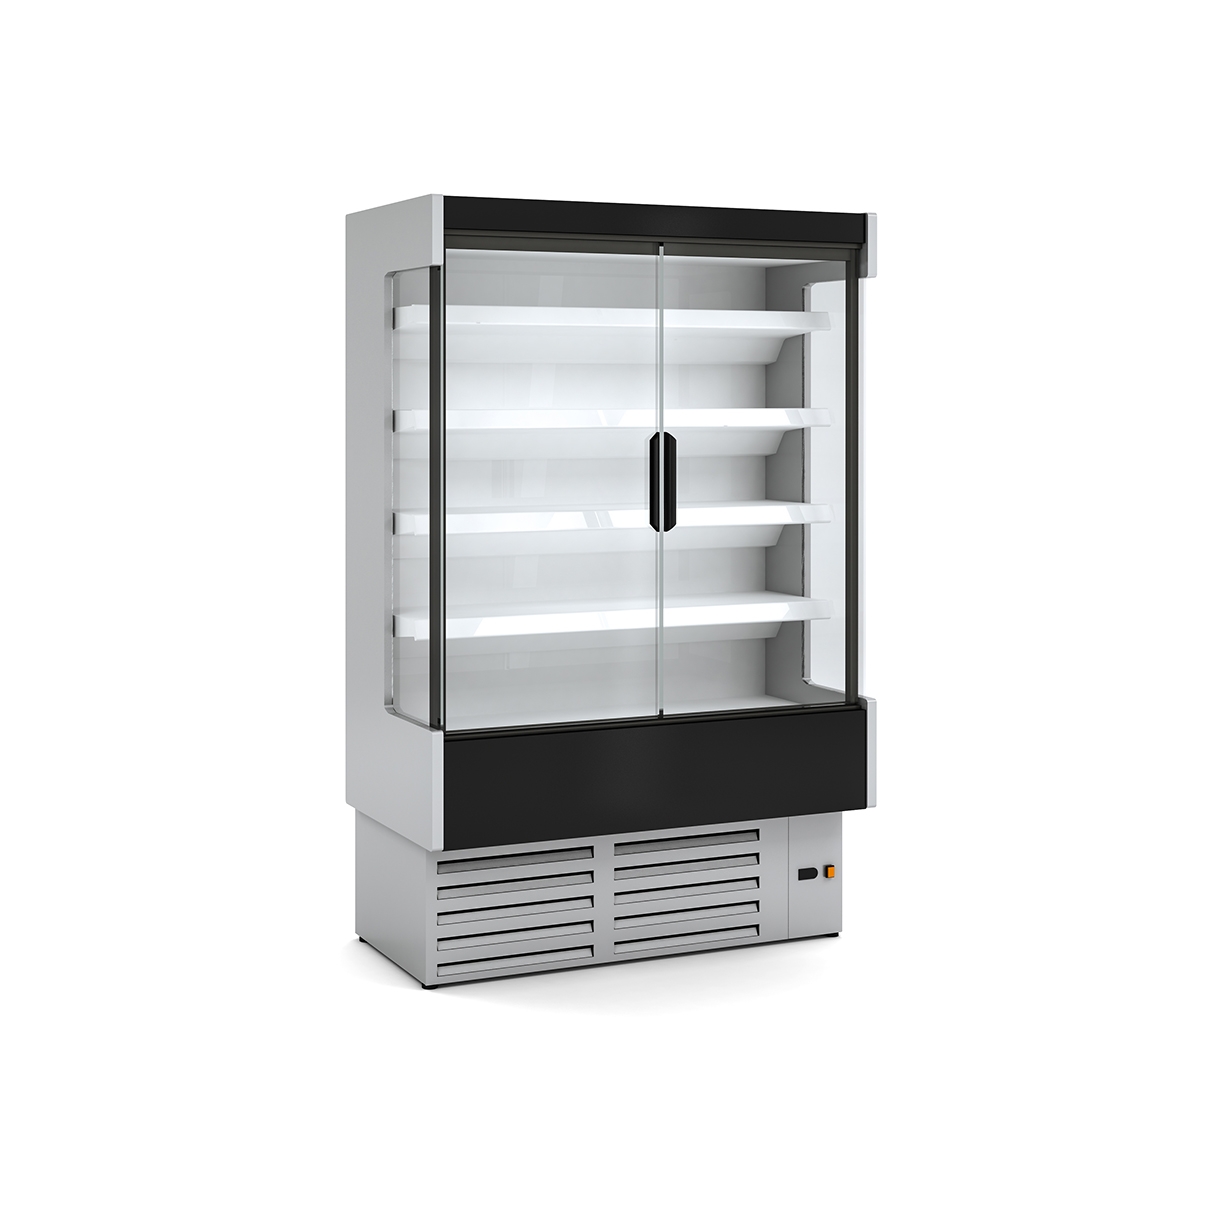 REFRIGERATED WALL-MOUNTED DISPLAY CABINET DG3 M1-M2